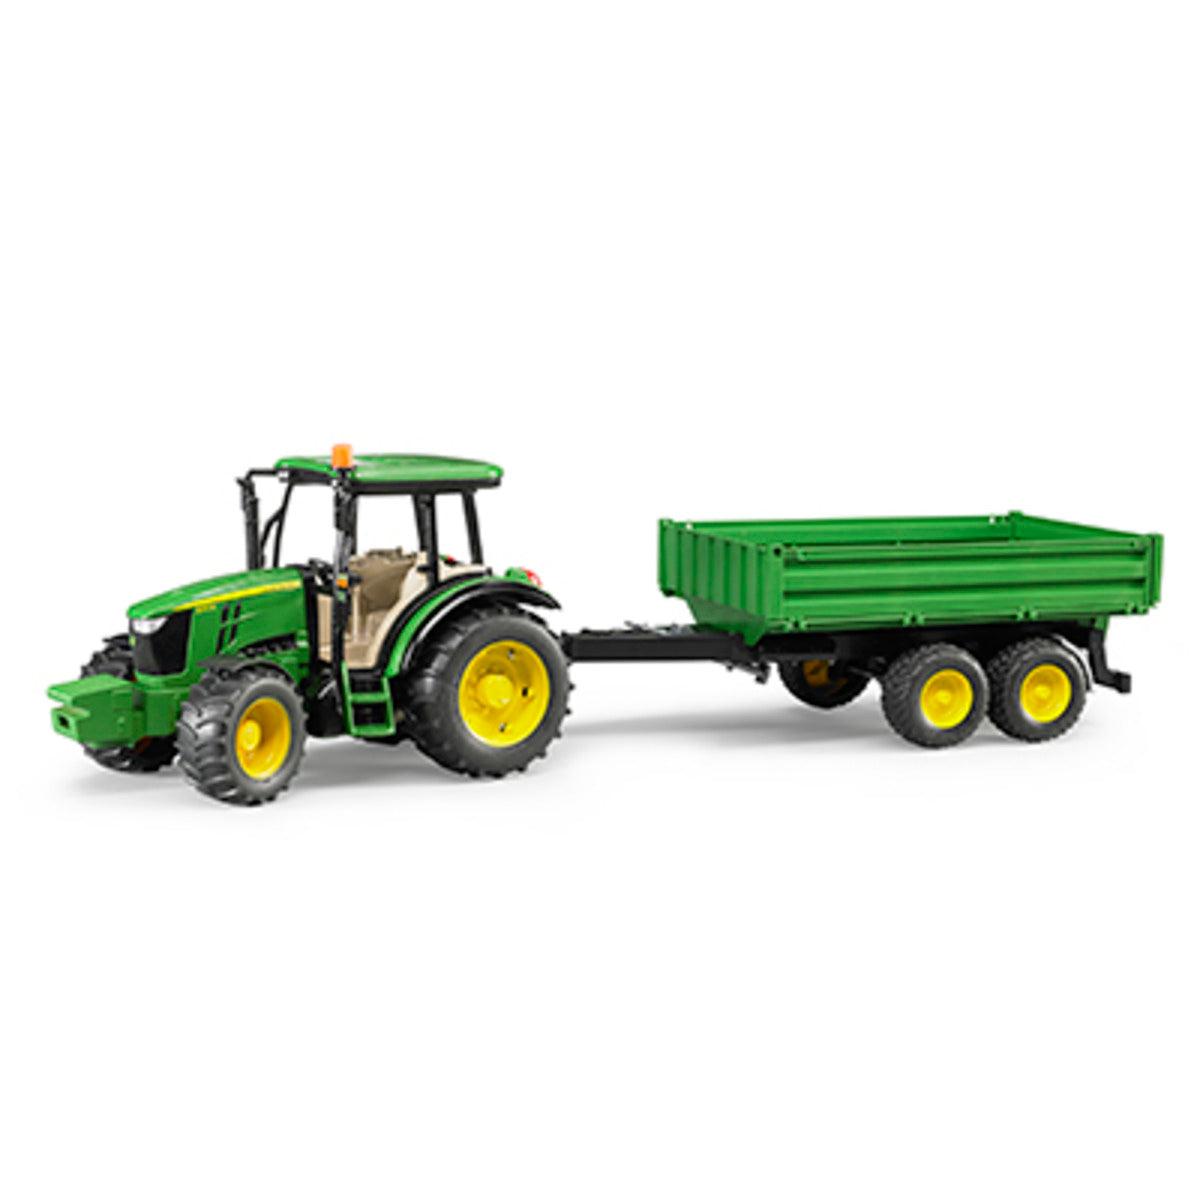 John Deere 5115M Tractor Toy with Tilting Trailer by Bruder - LP65044